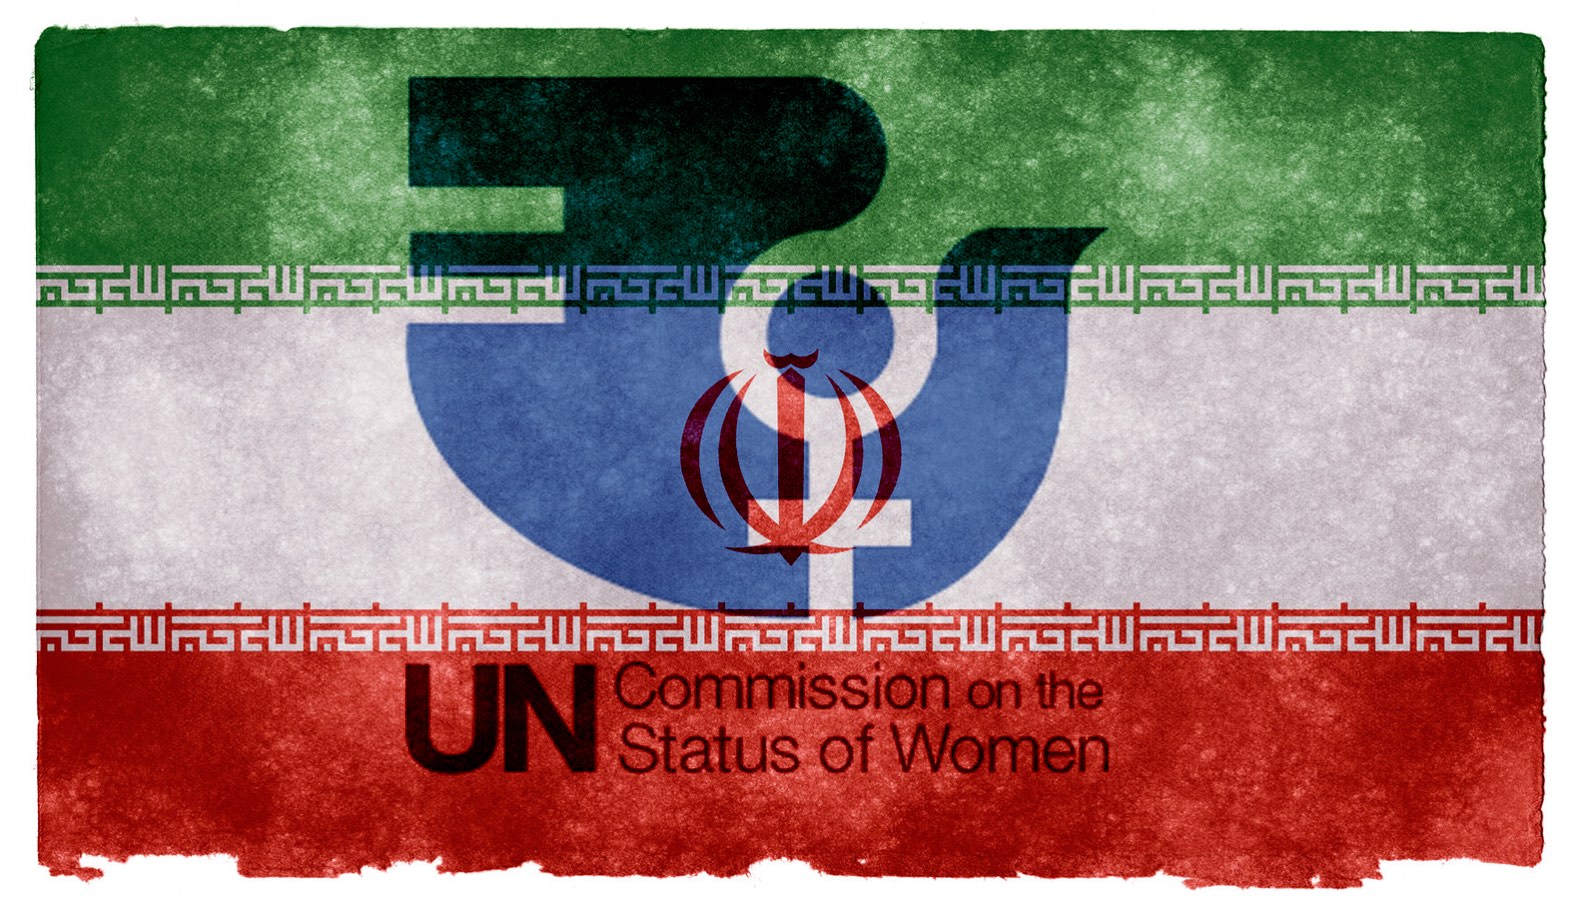 The flag of Iran overshadows the UN Commission on the Status of Women.